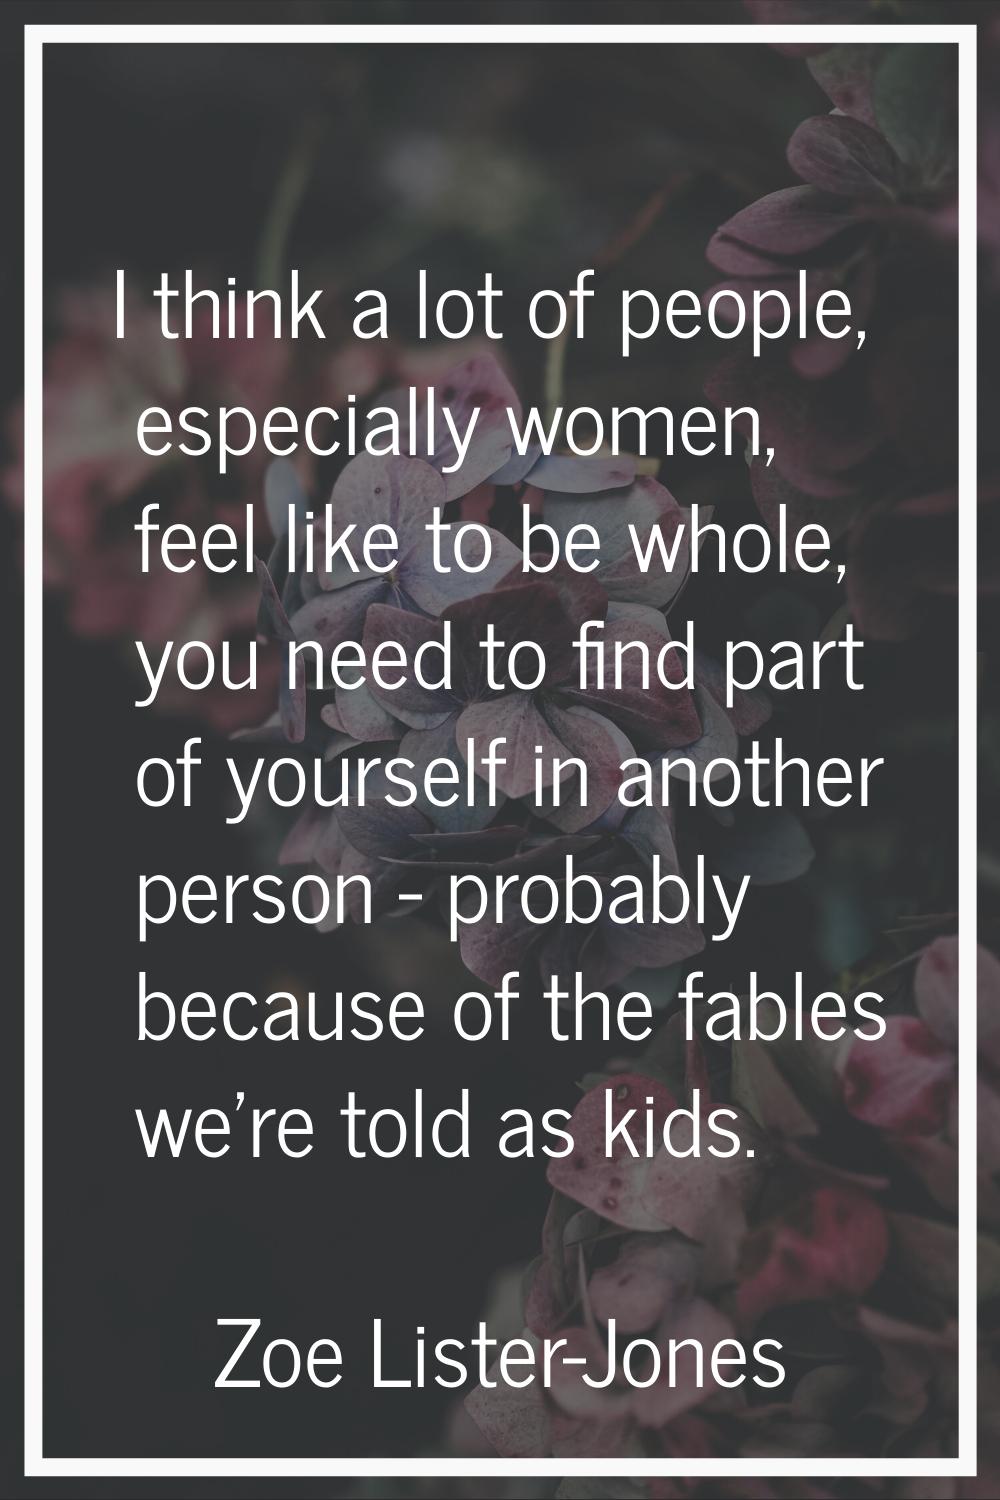 I think a lot of people, especially women, feel like to be whole, you need to find part of yourself